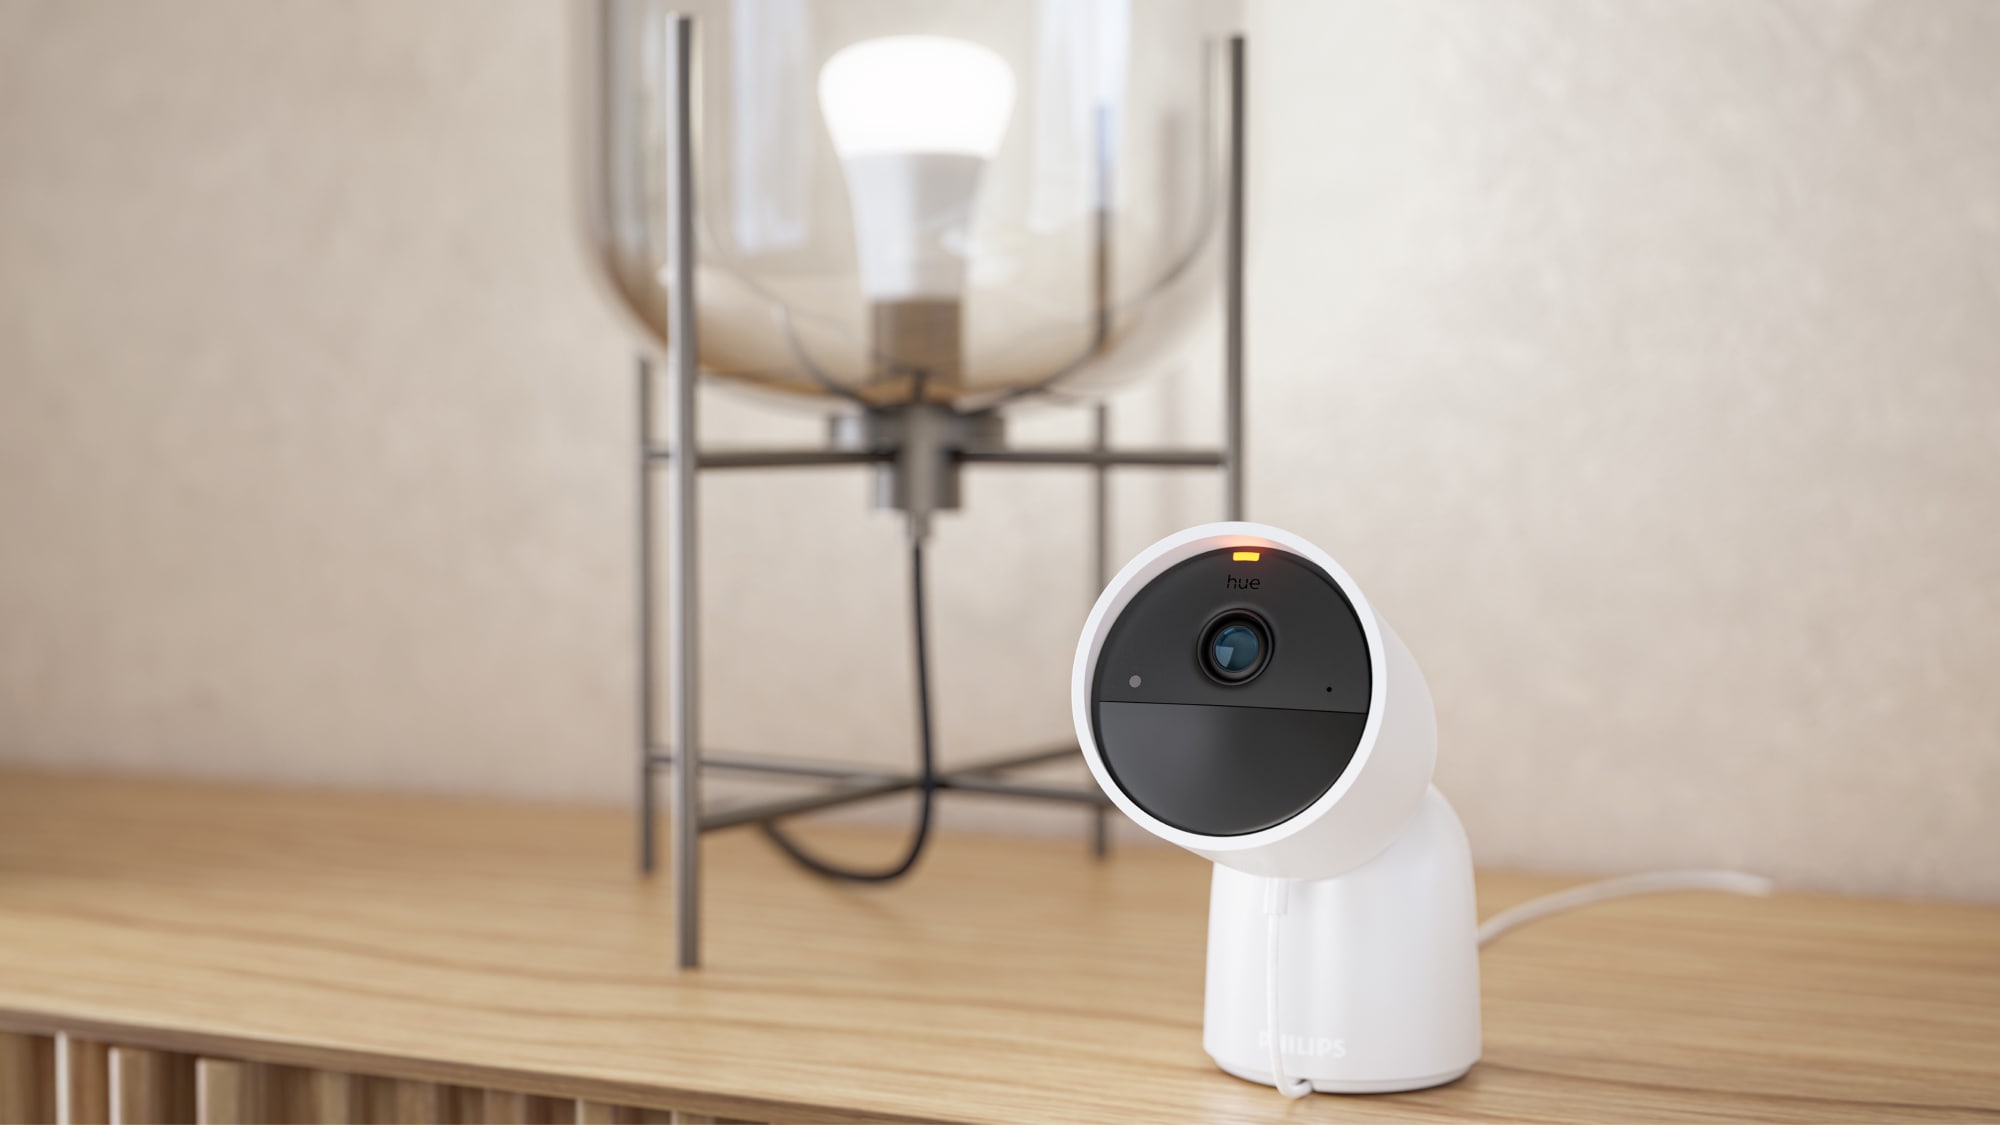 Philips Hue's new security camera uses your smart lights to scare off  prowlers